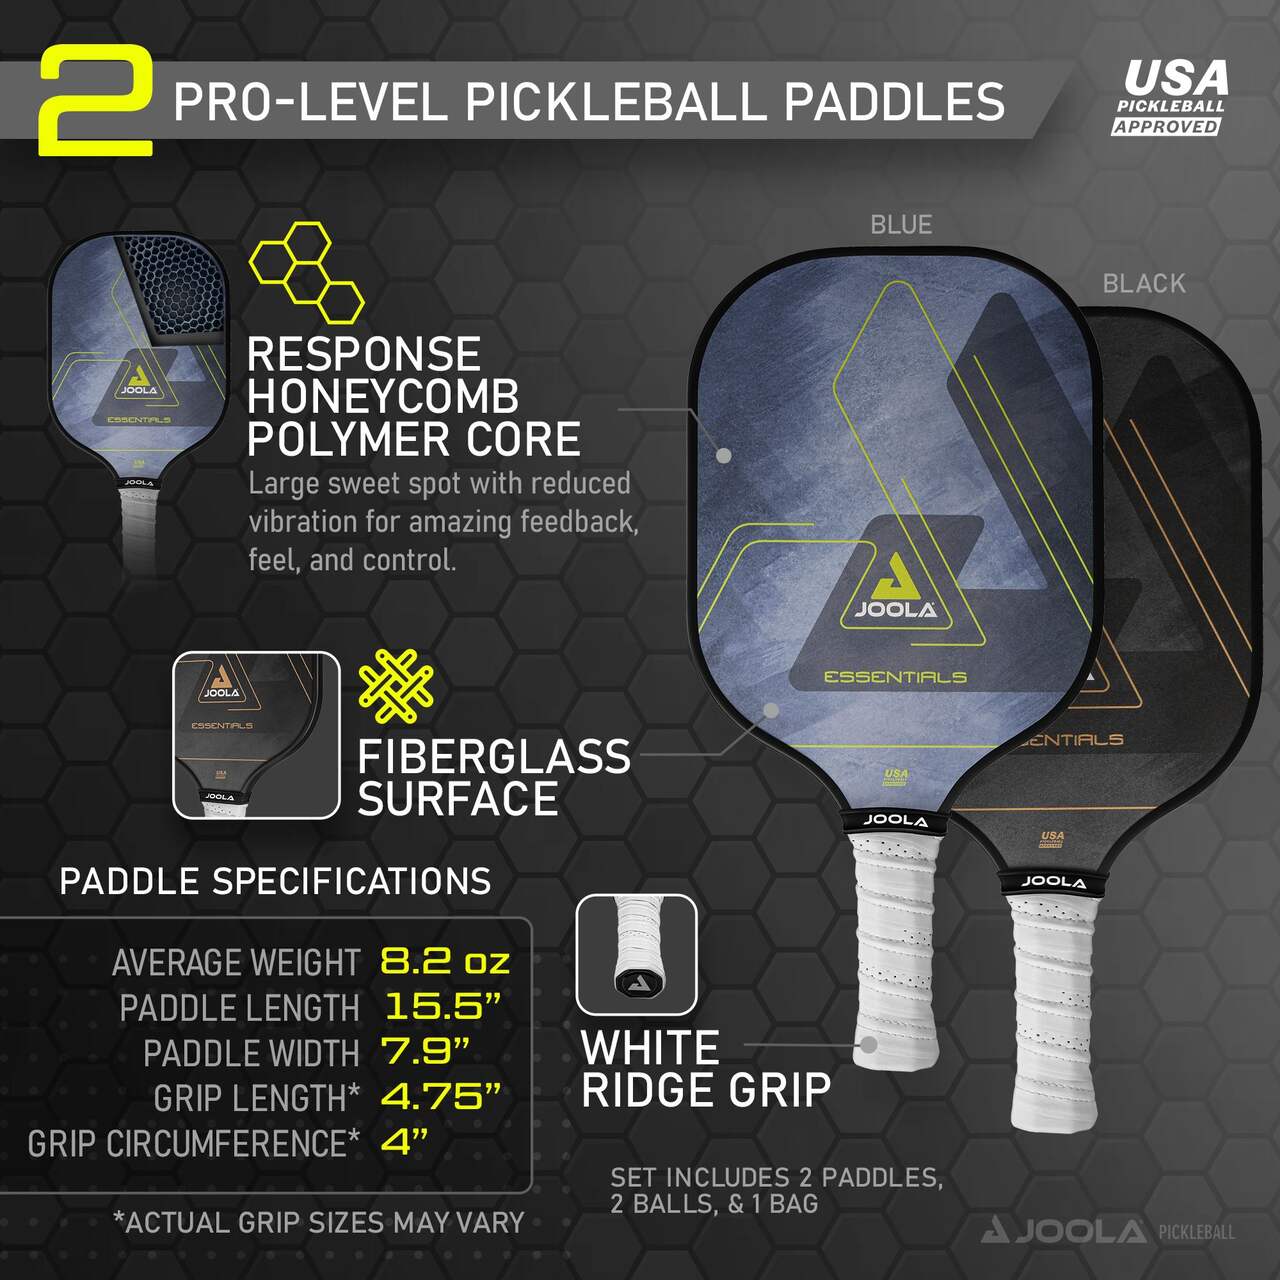 Wilson Portable Quick Set-Up Pickleball Net w/ Carry Bag, USAPA Approved,  22-ft x 3-ft